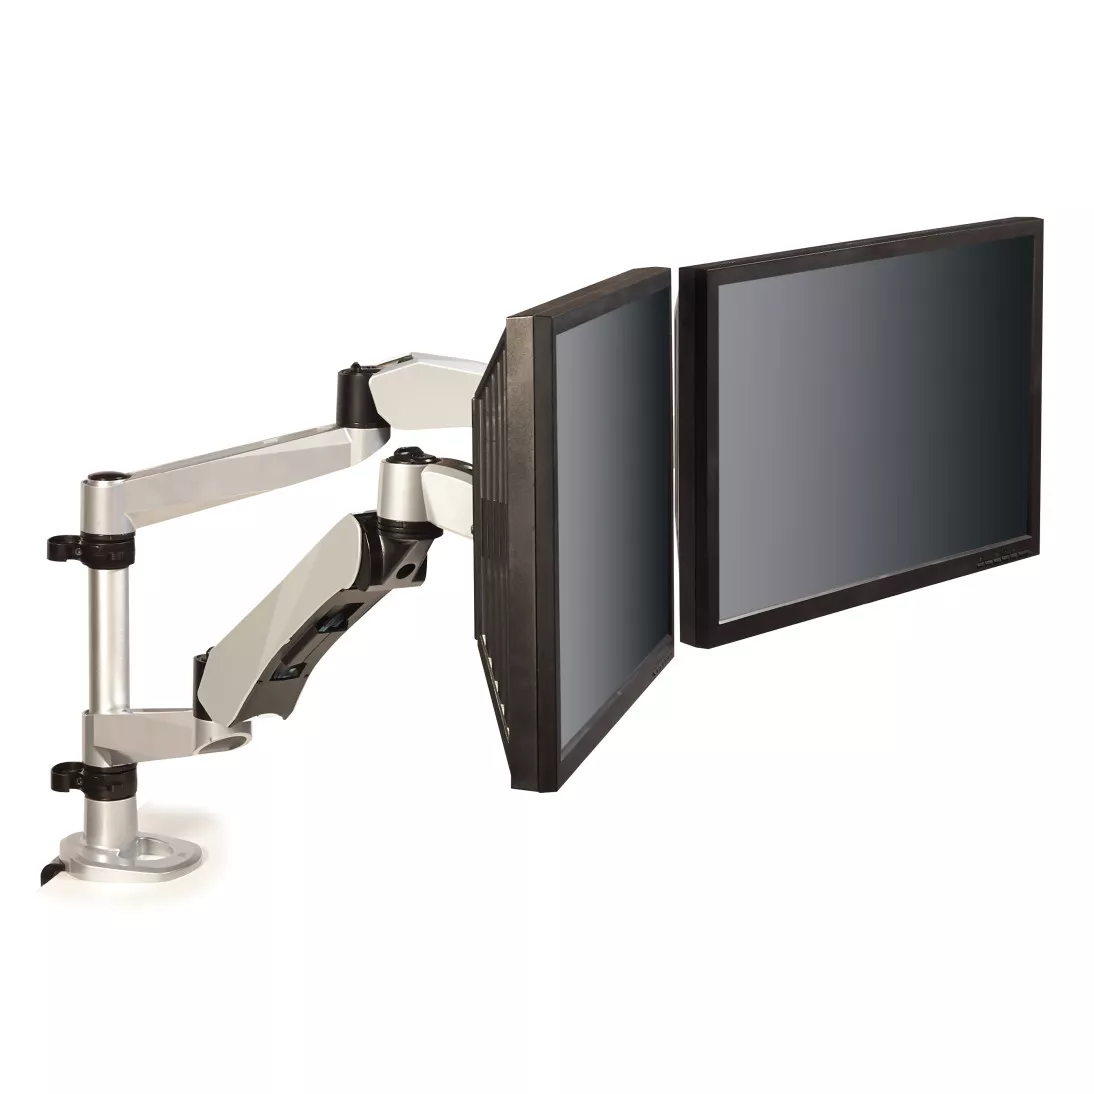 3M™ Monitor Stand, MA265S